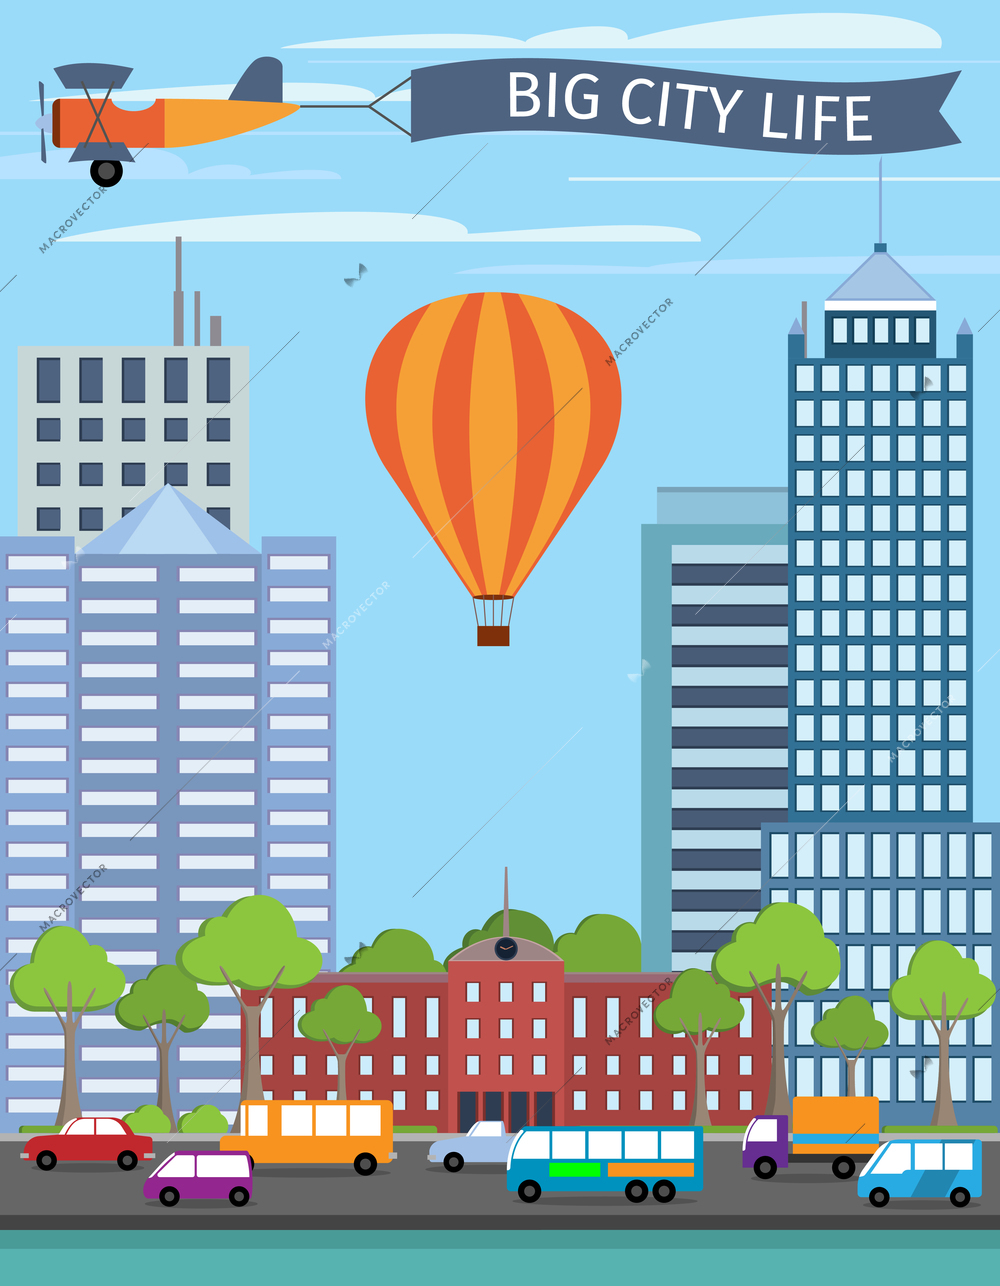 Modern urban building big city life poster with balloon vector illustration